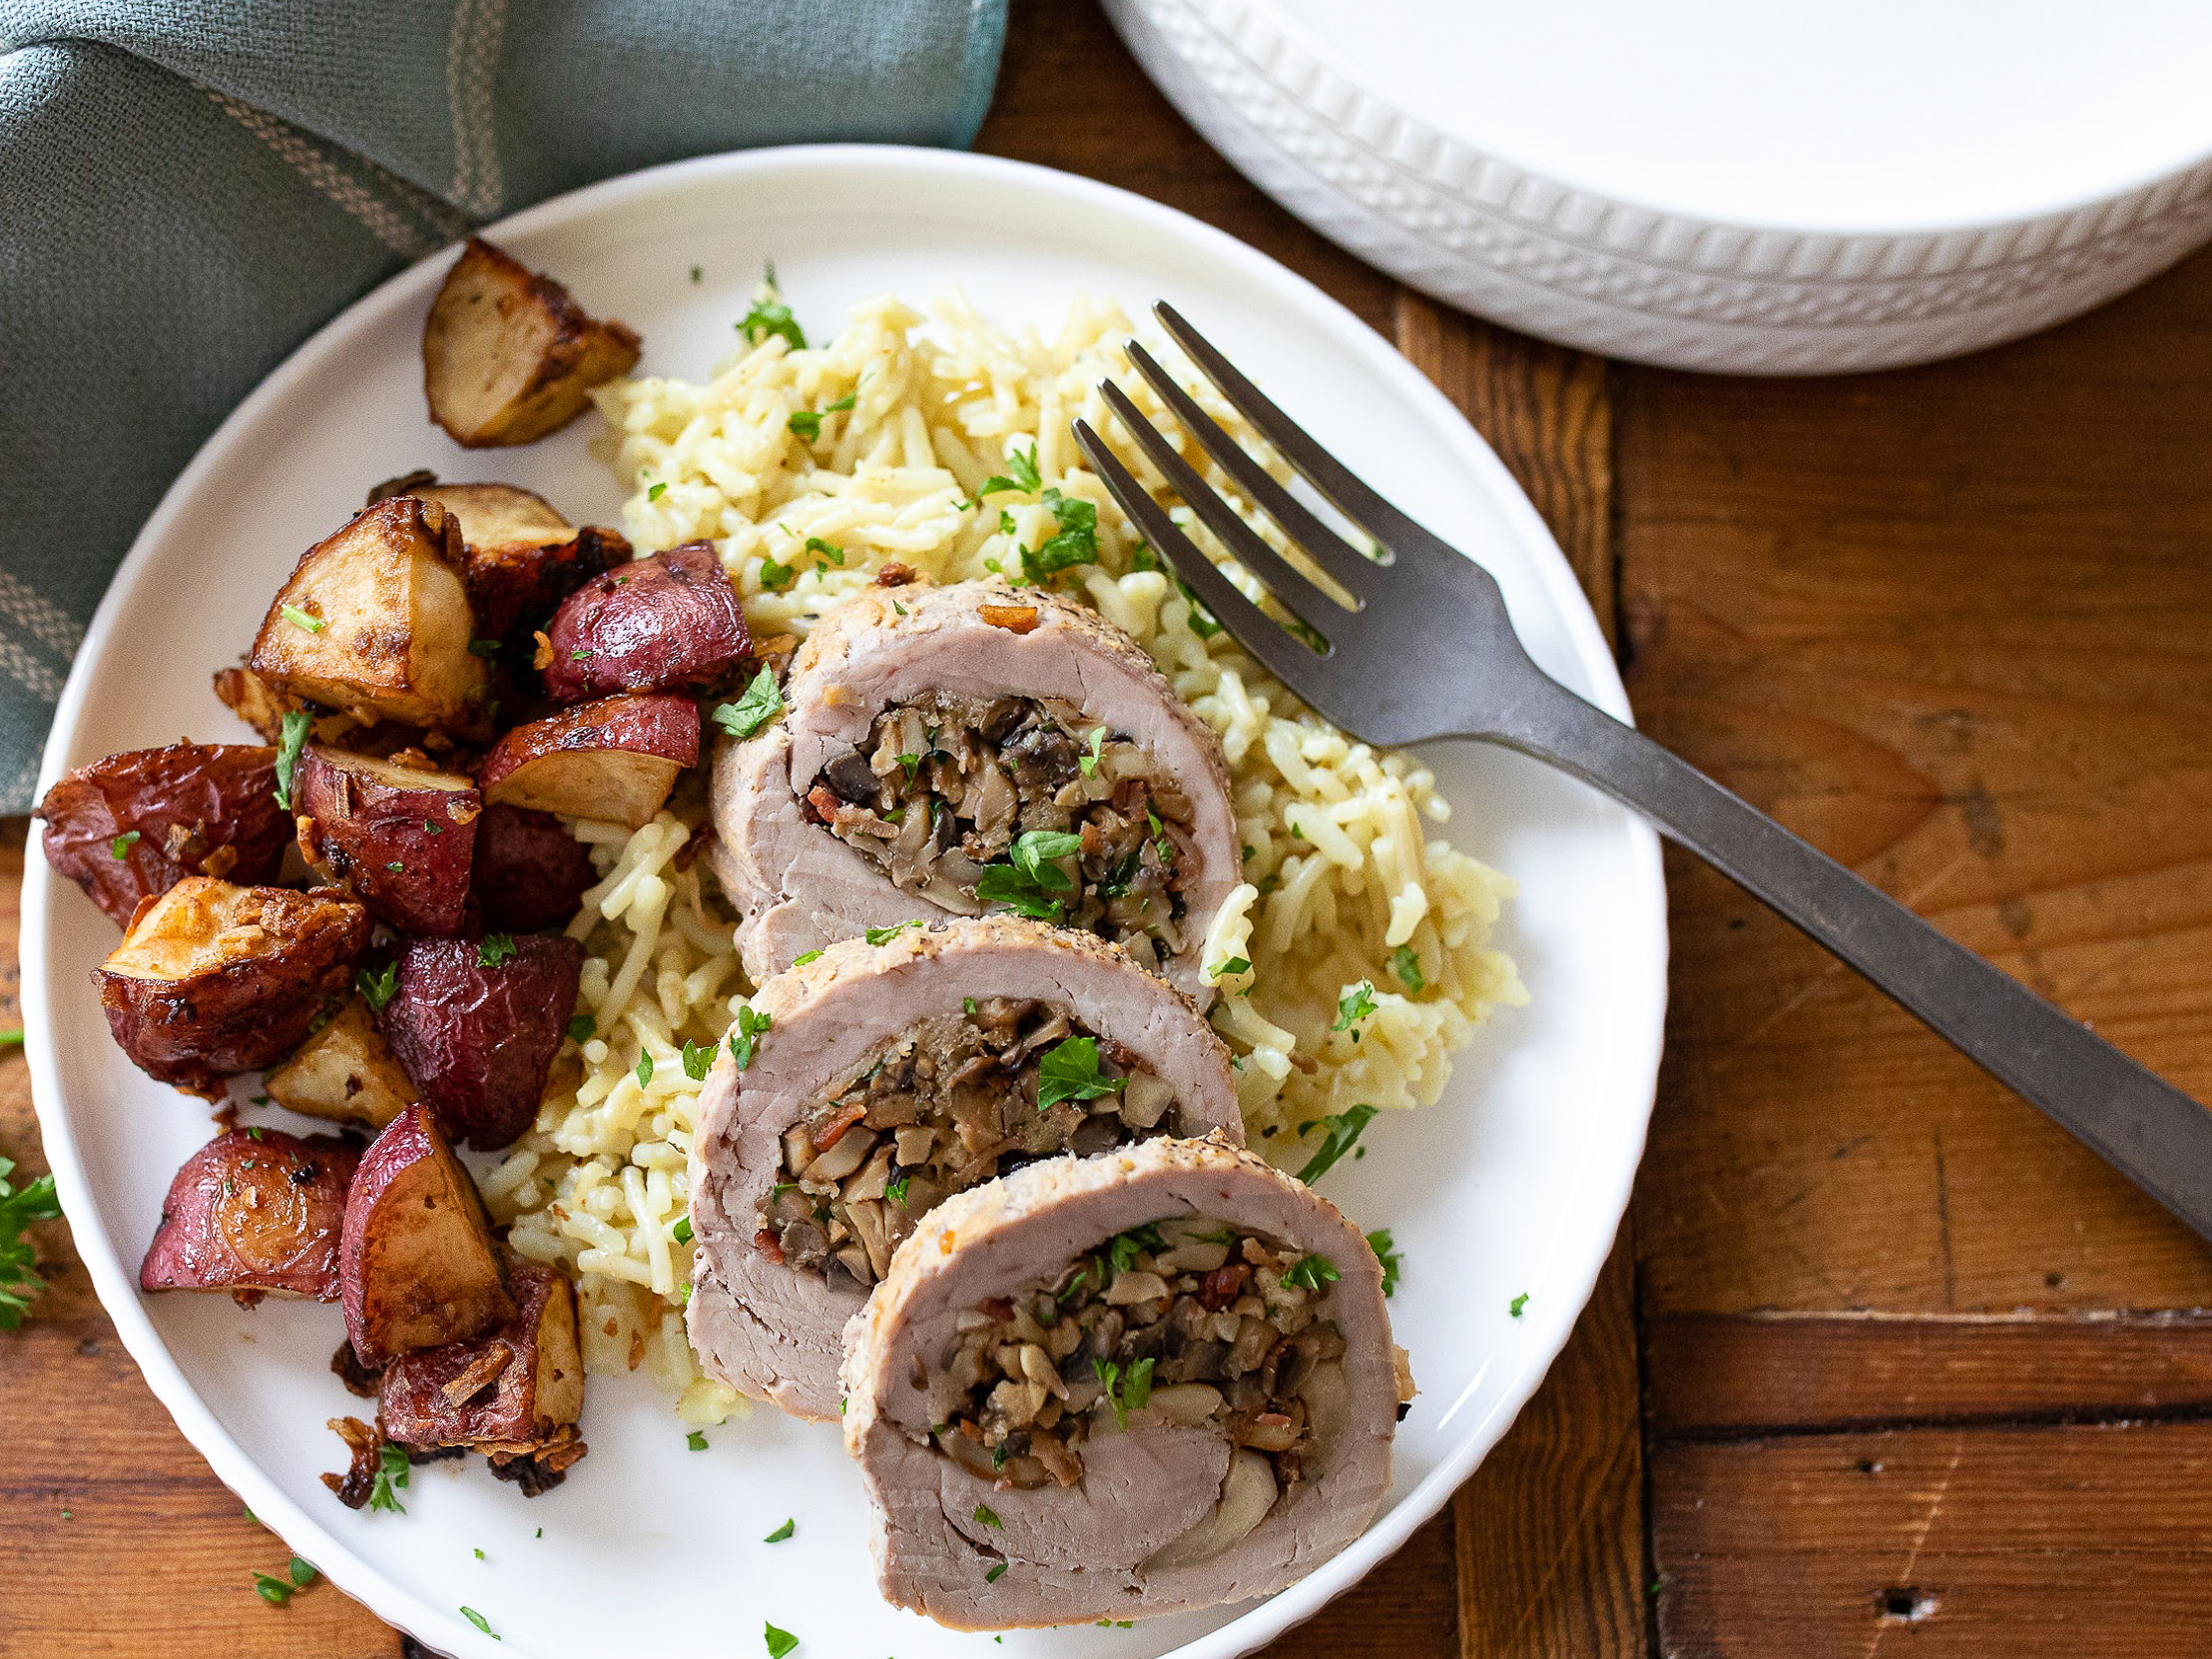 Pick Up Delicious Meal Essentials And Save BIG At Publix - Try My Stuffed Pork Loin & Roasted Potatoes on I Heart Publix